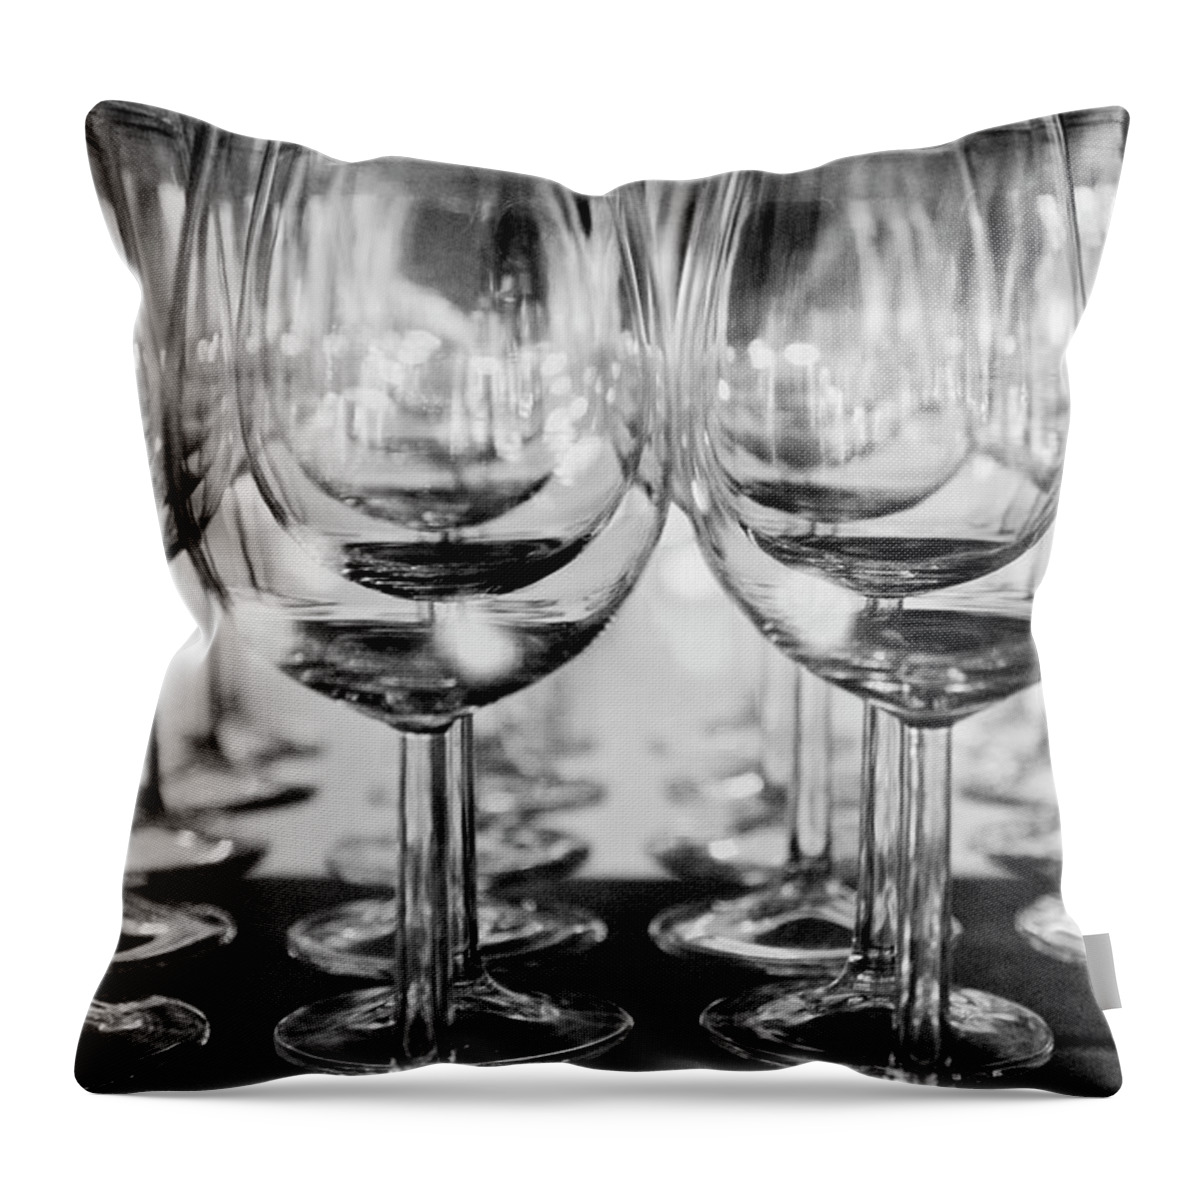 In A Row Throw Pillow featuring the photograph Wine Glasses by Cristina Corduneanu